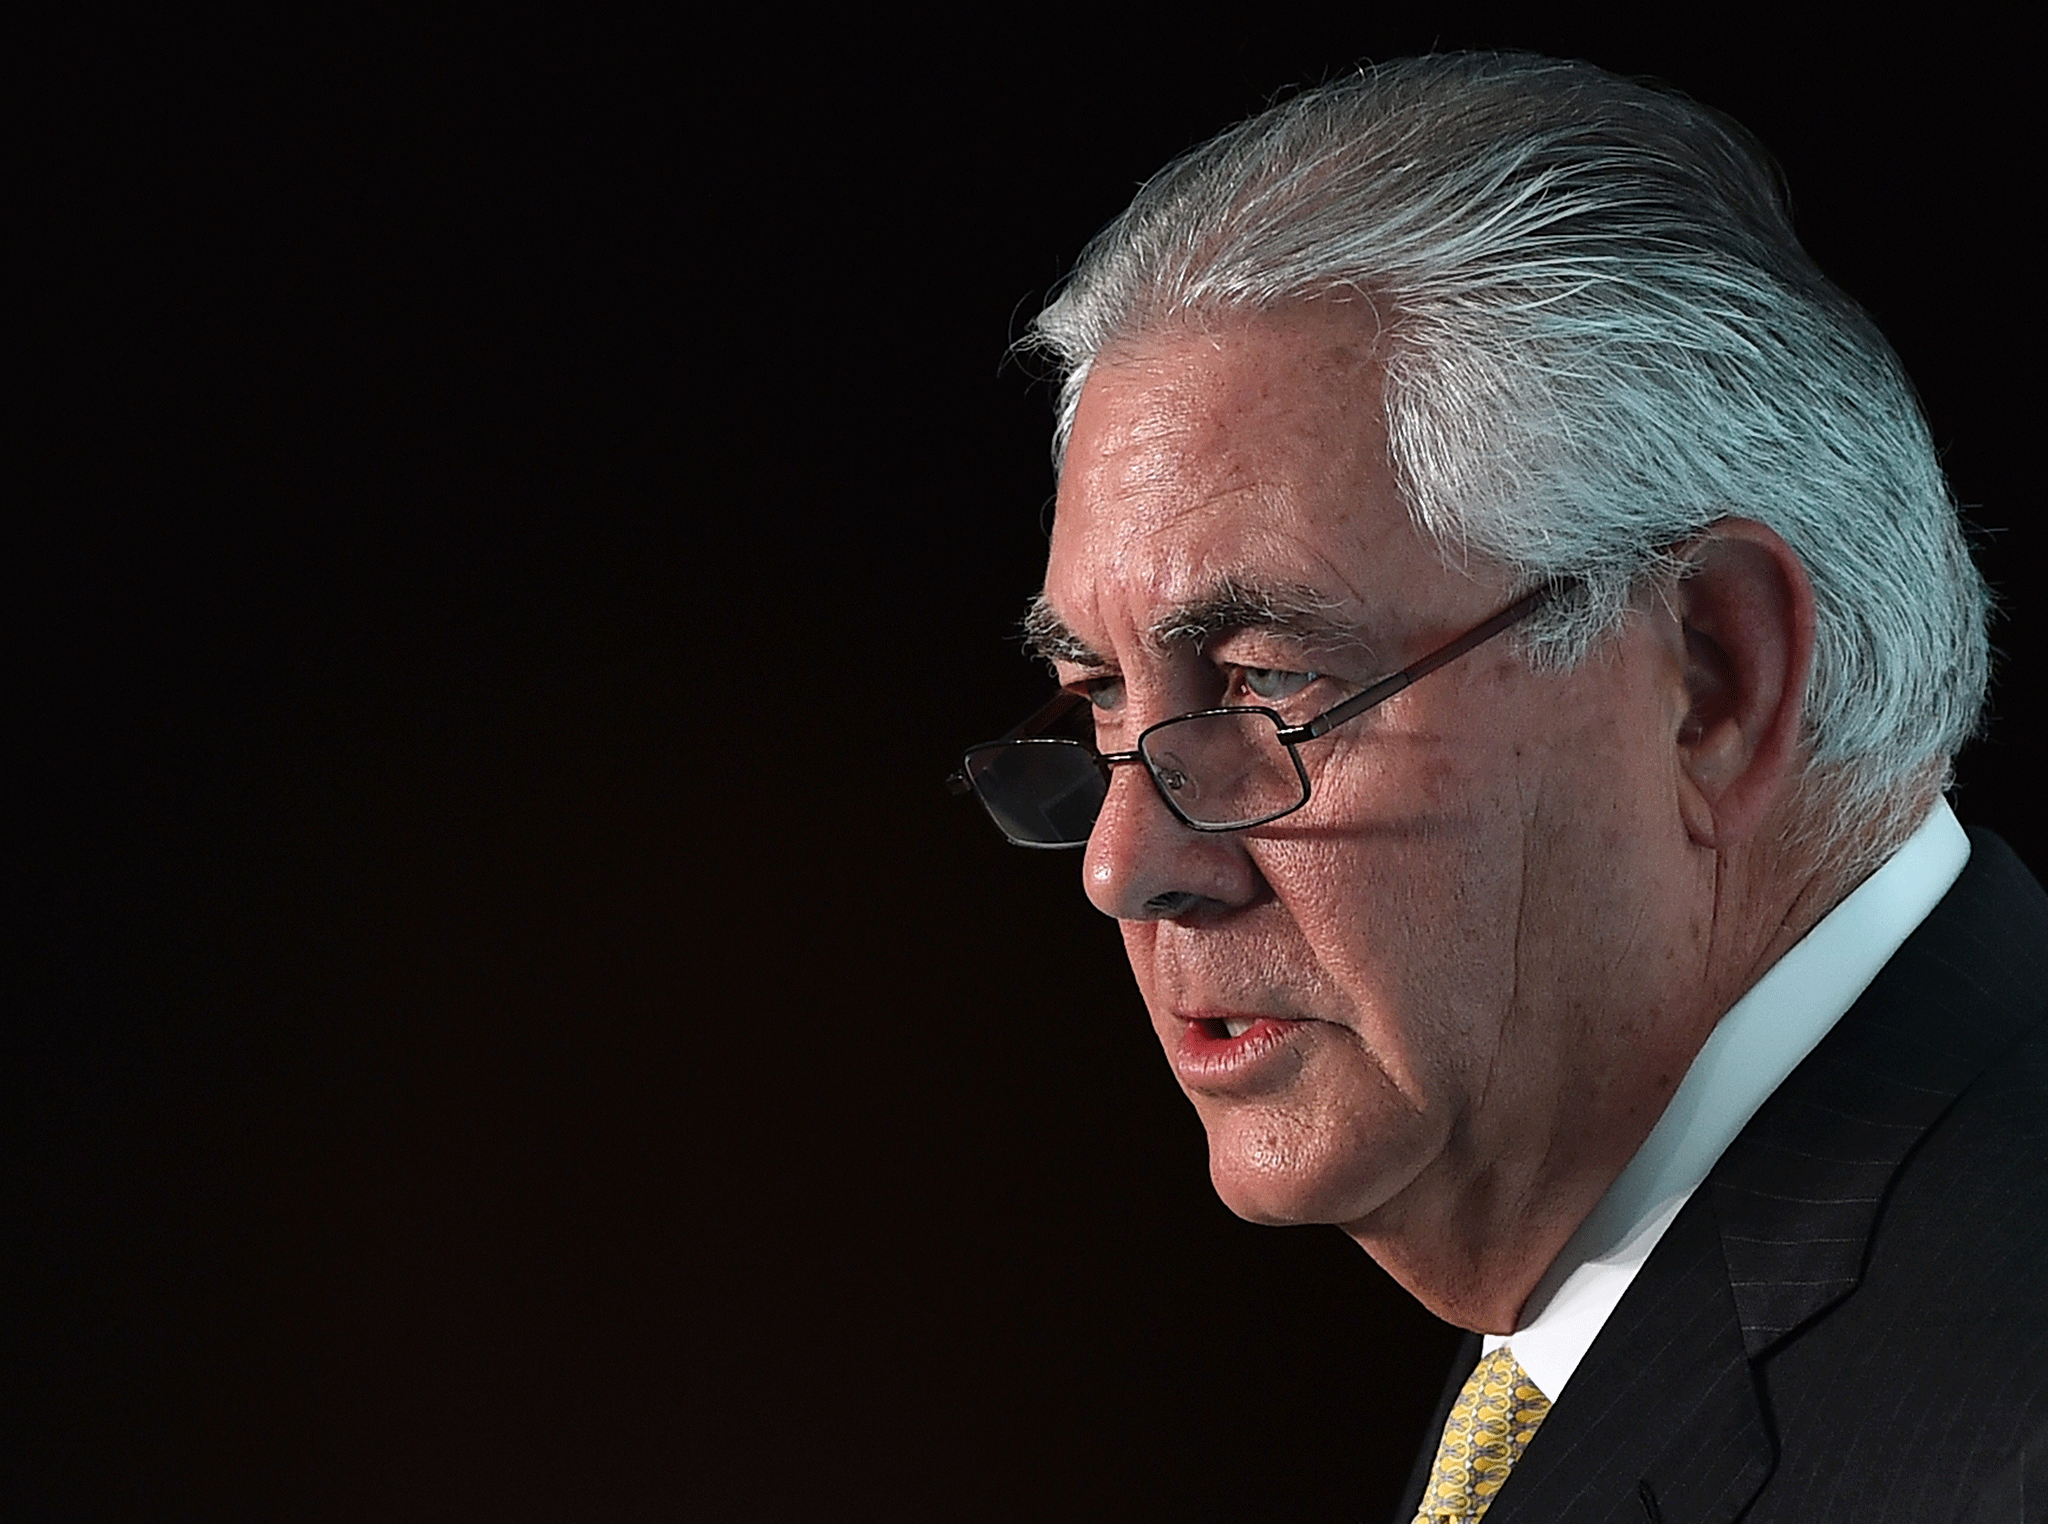 Rex Tillerson to receive $180m payout from ExxonMobil